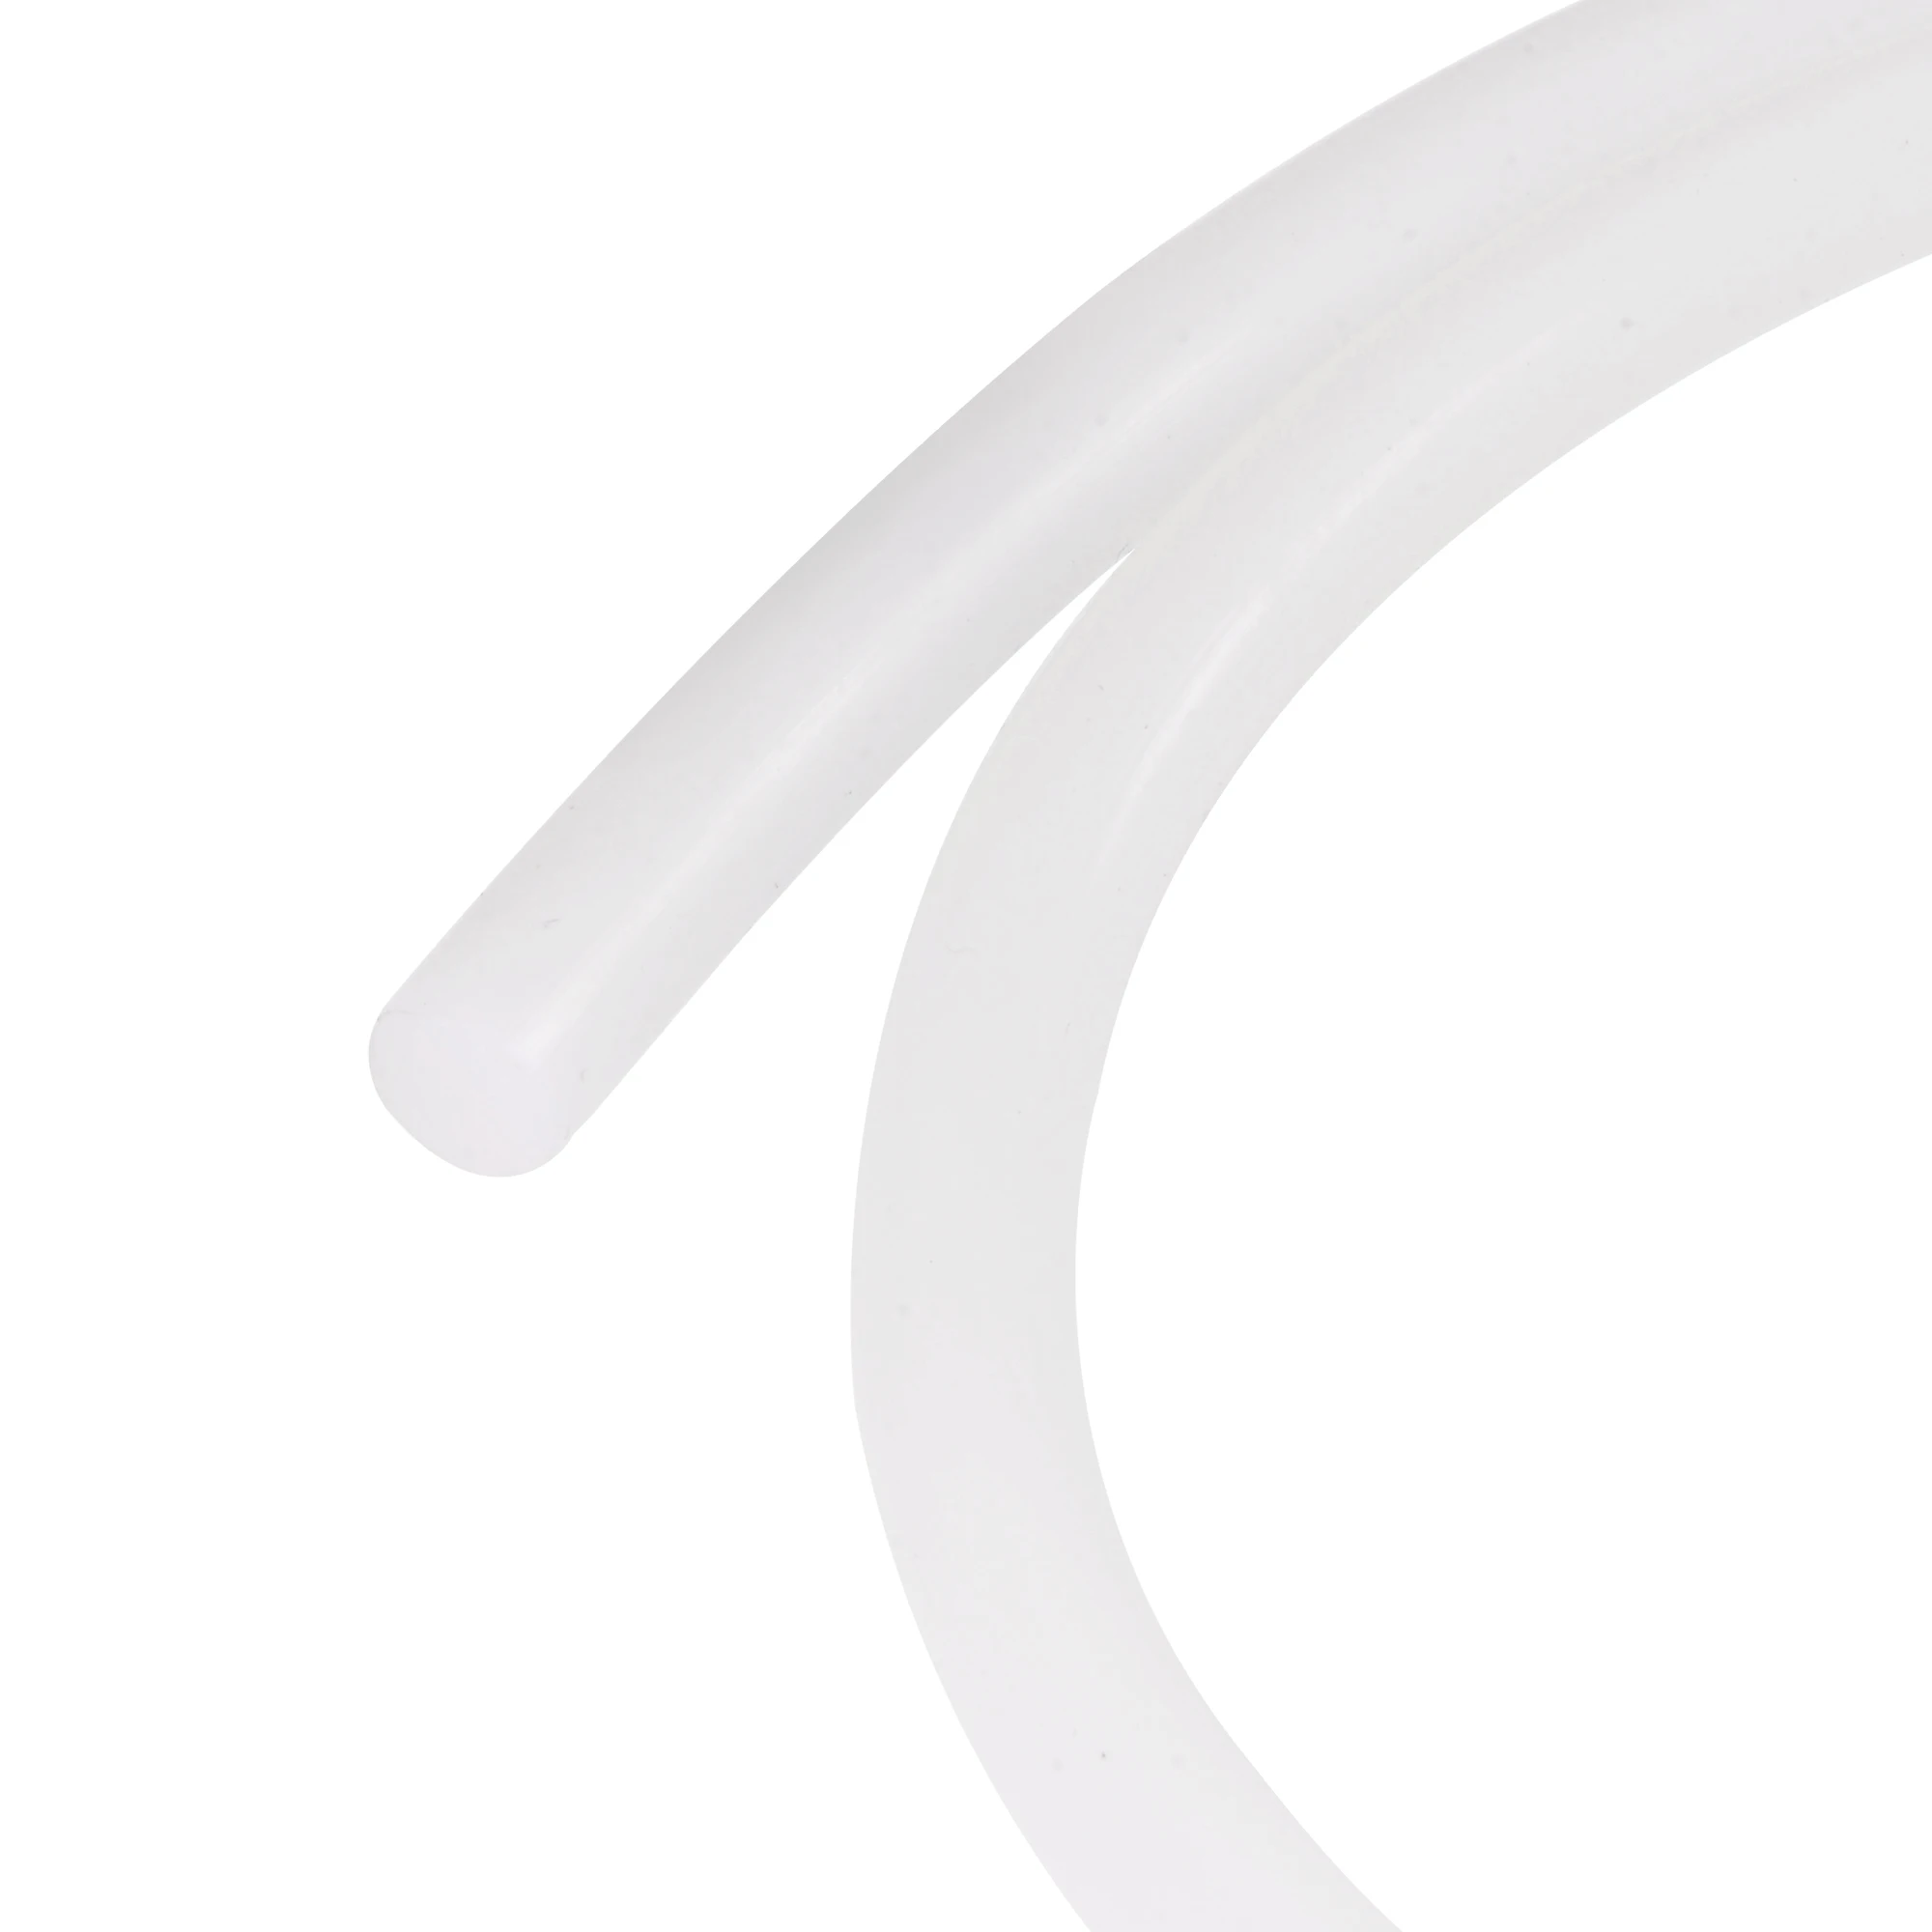 Uxcell Silicone Bending Insert Hard Tube 3/8 5ft White Soft for Rigid PETG Tubing Water Cooling